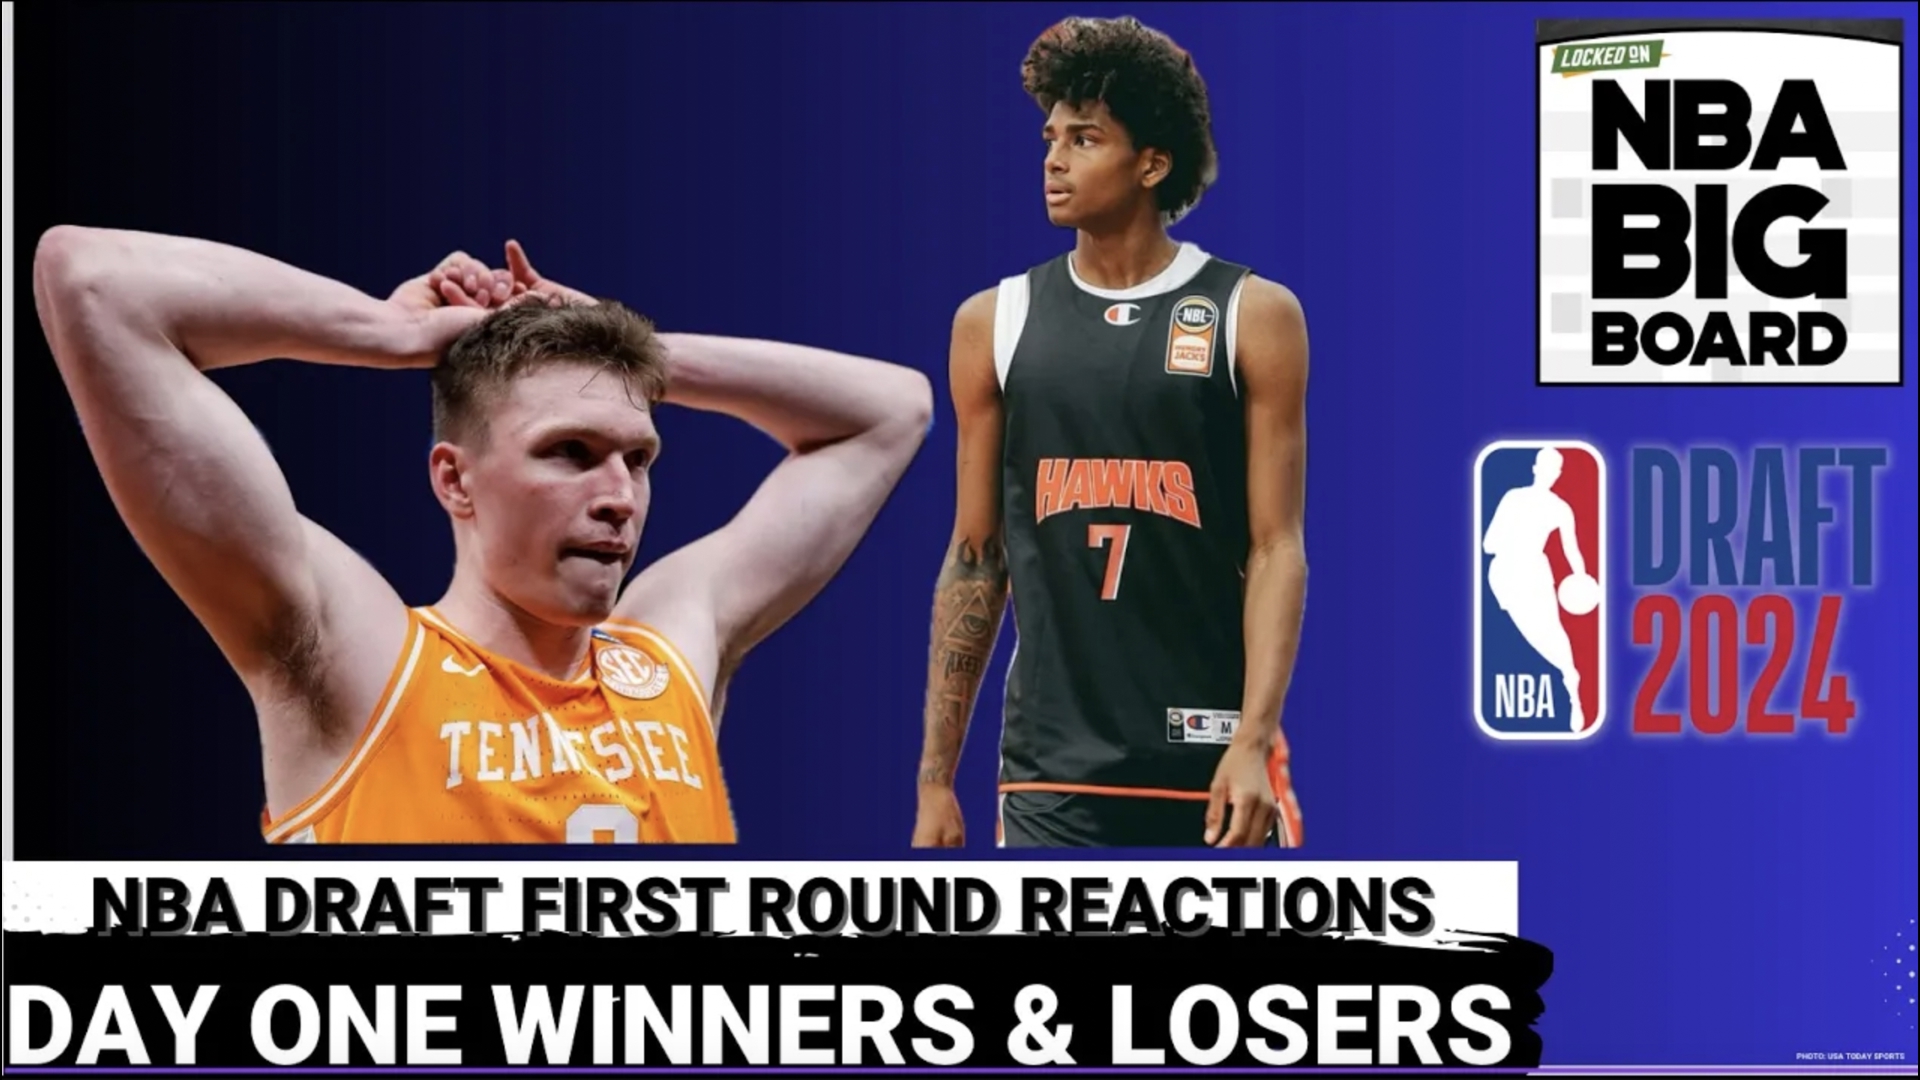 Who were the steals and reaches of Day 1 of the NBA Draft? Who were the biggest winners and losers of the first day?